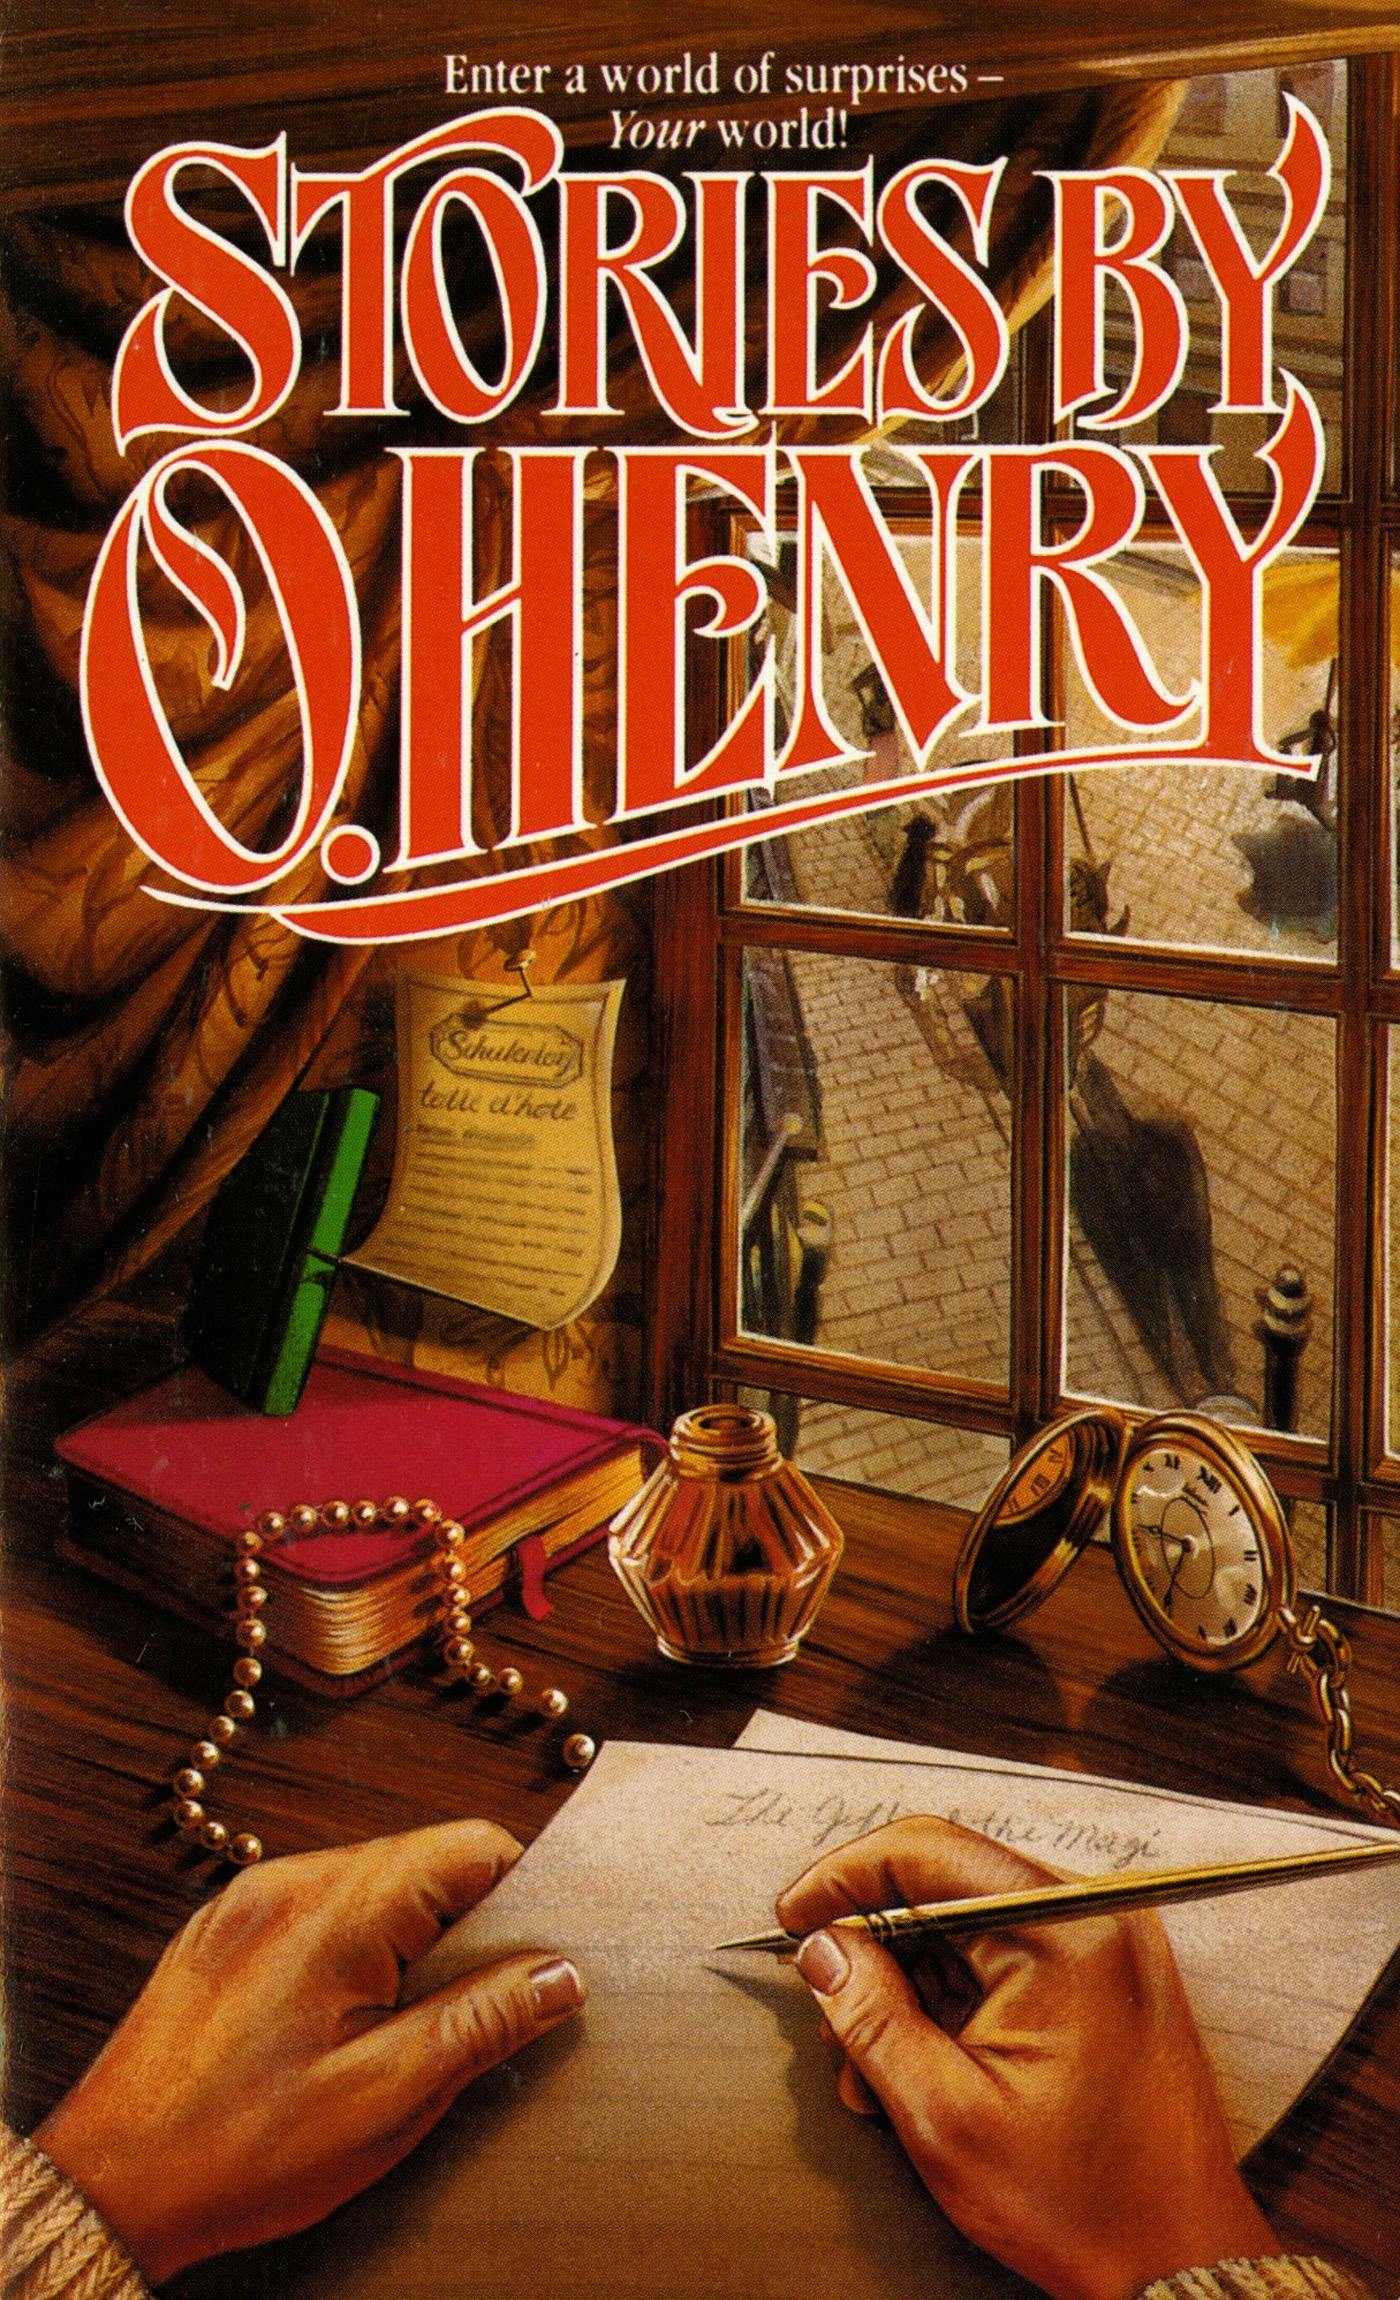 Image of Stories by O. Henry